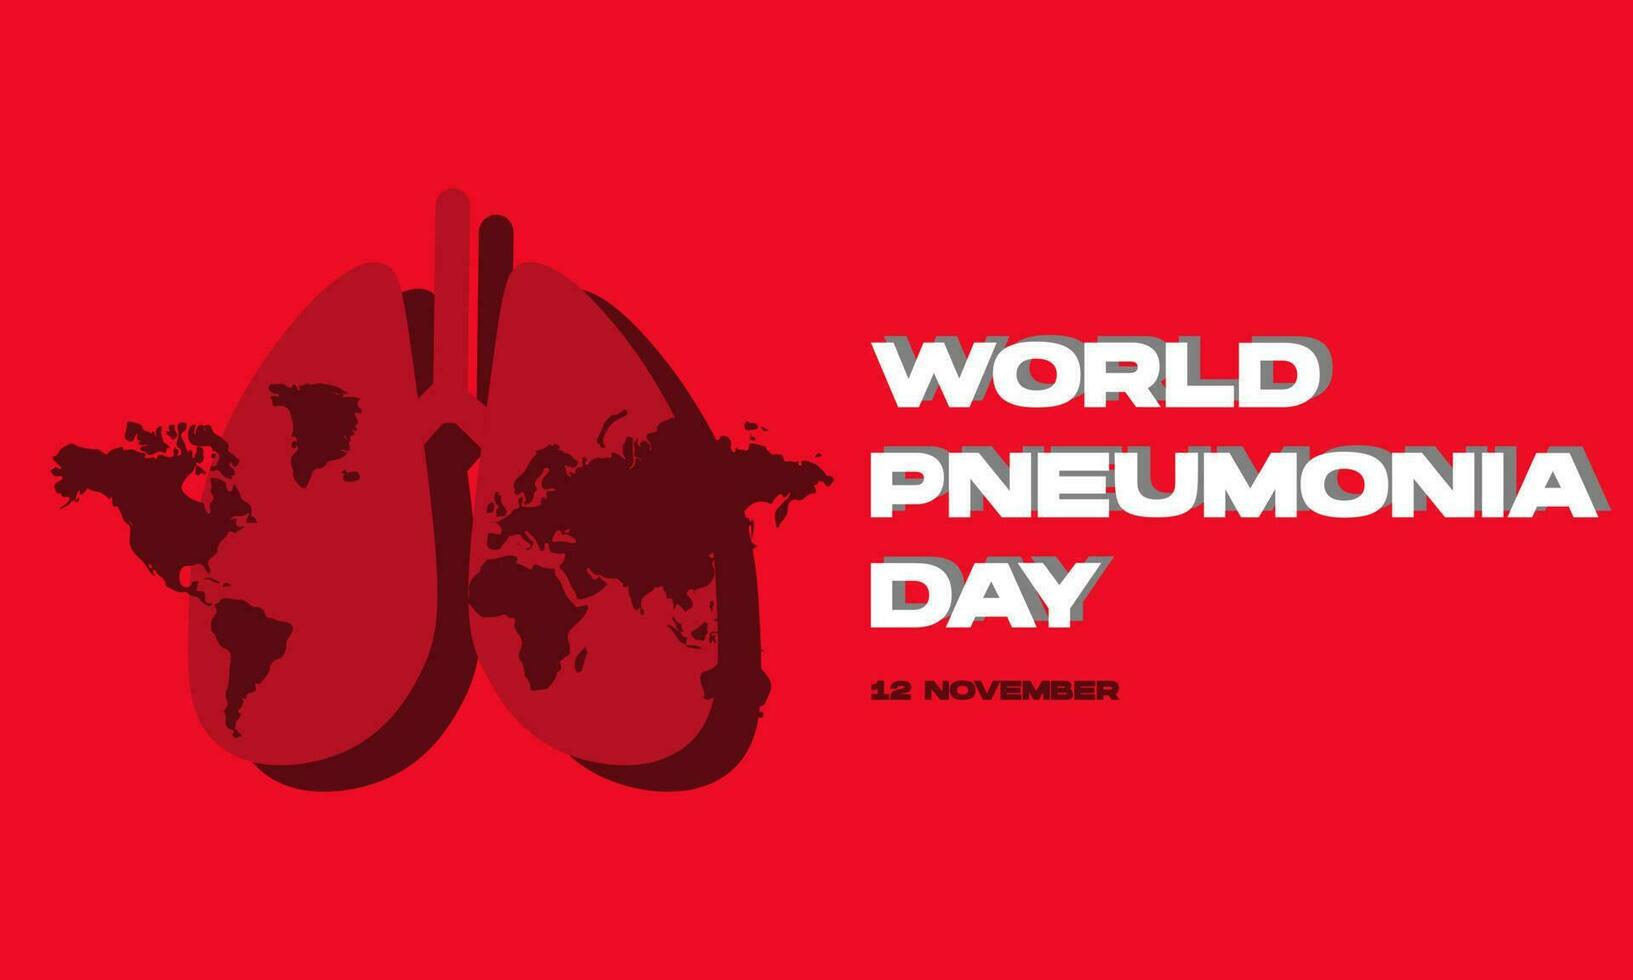 World Pneumonia Day Backround Vector Illustration with Lungs and World Map Illustration in Left. For Banner, Poster, Print, Card Invitation